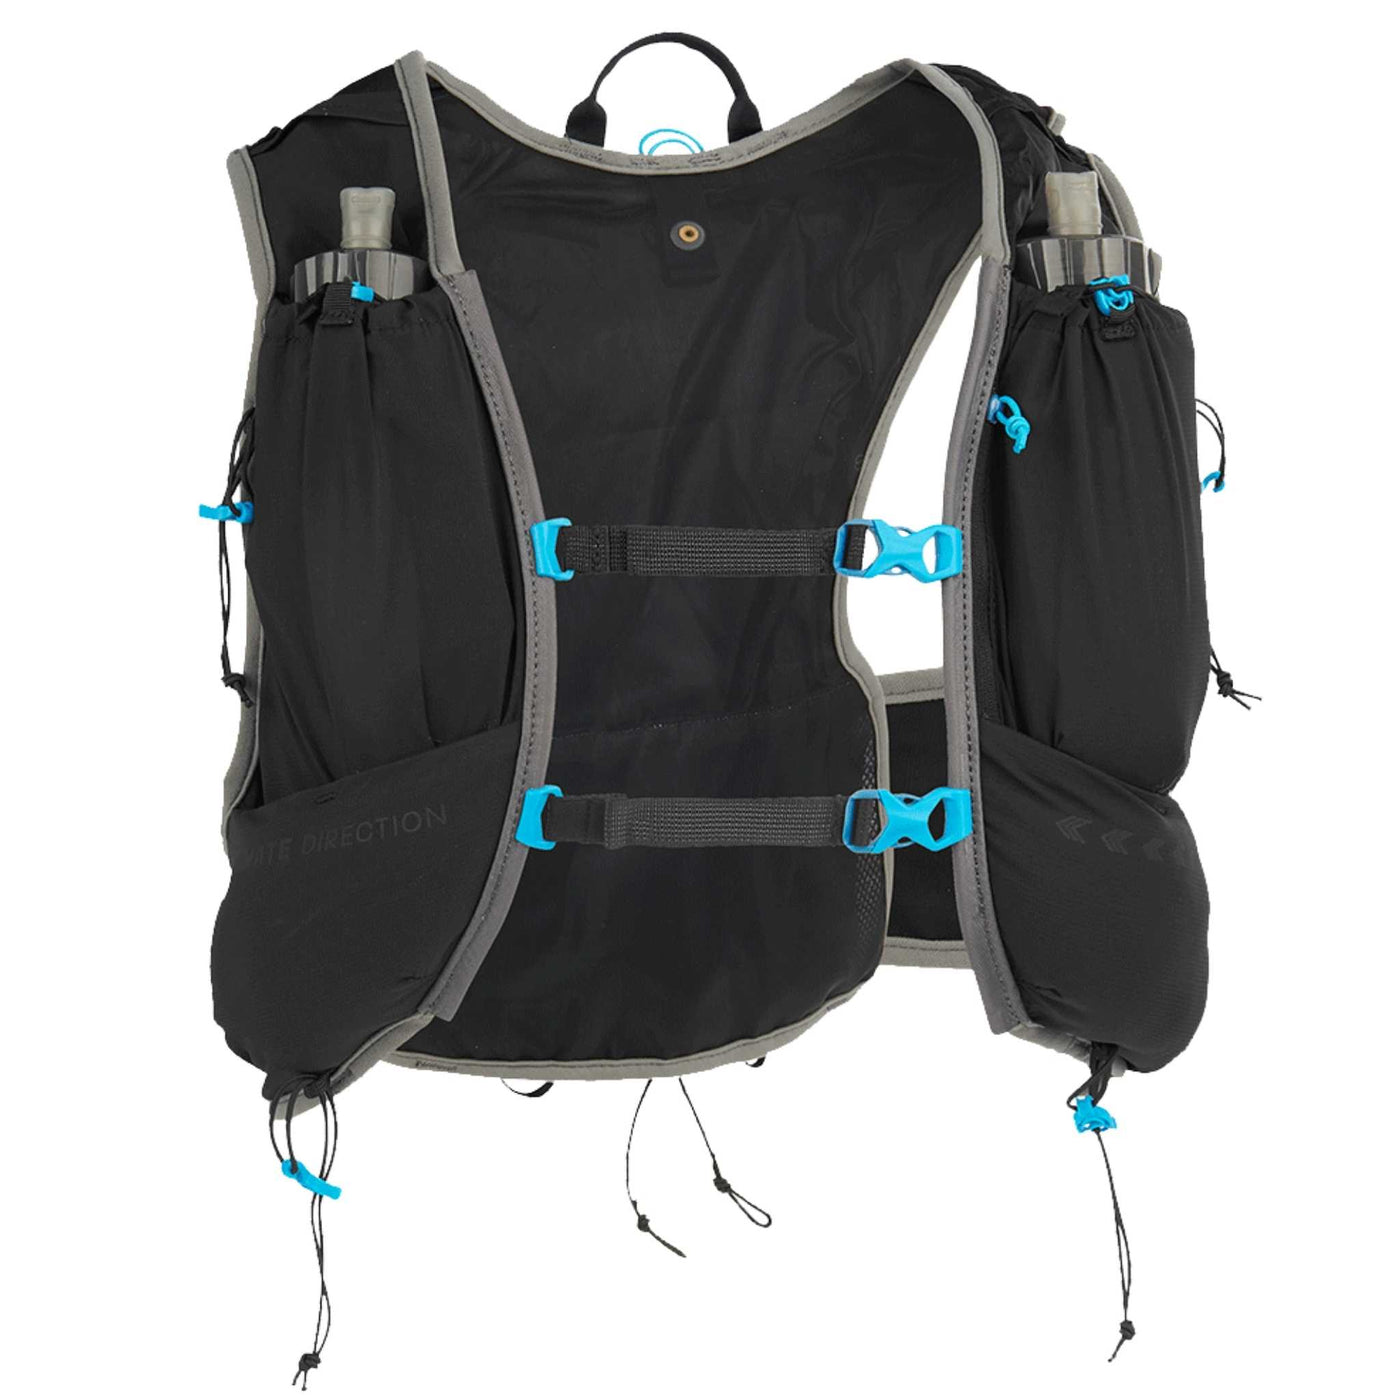 Ultimate Direction Mountain Vest 6.0 | Men's Hydration Packs and Vests NZ | Further Faster Christchurch NZ | #onyx